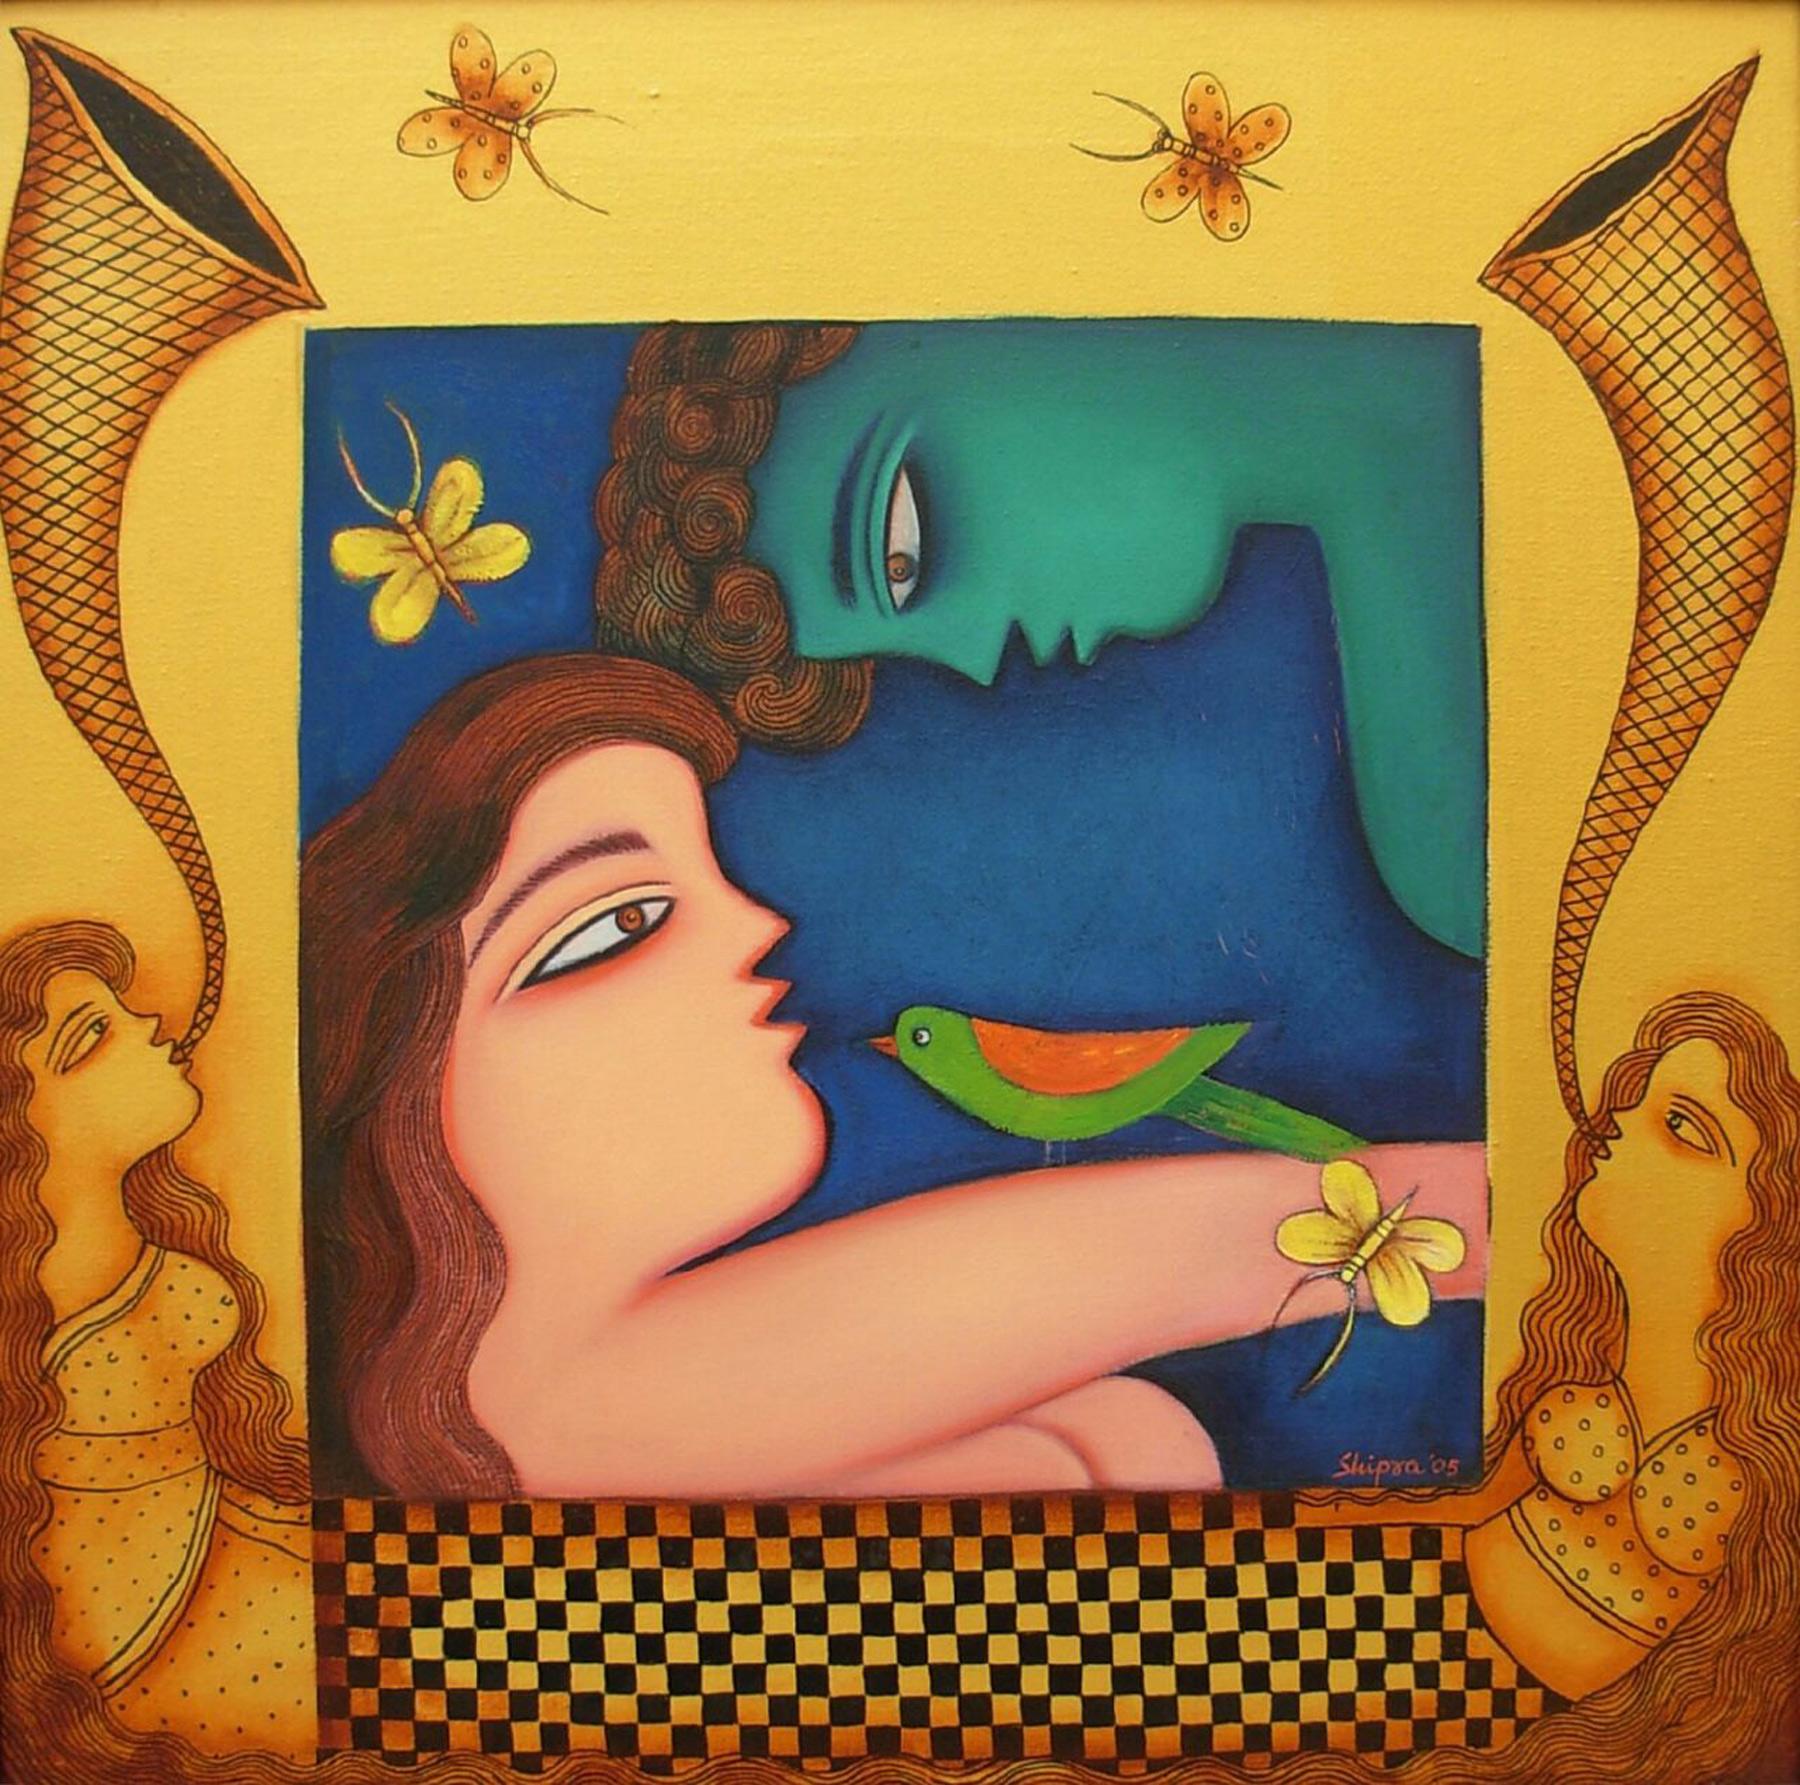 Happy Couple, Bird, Butterfly, Acrylic on canvas, Blue, Green, Brown "In Stock"